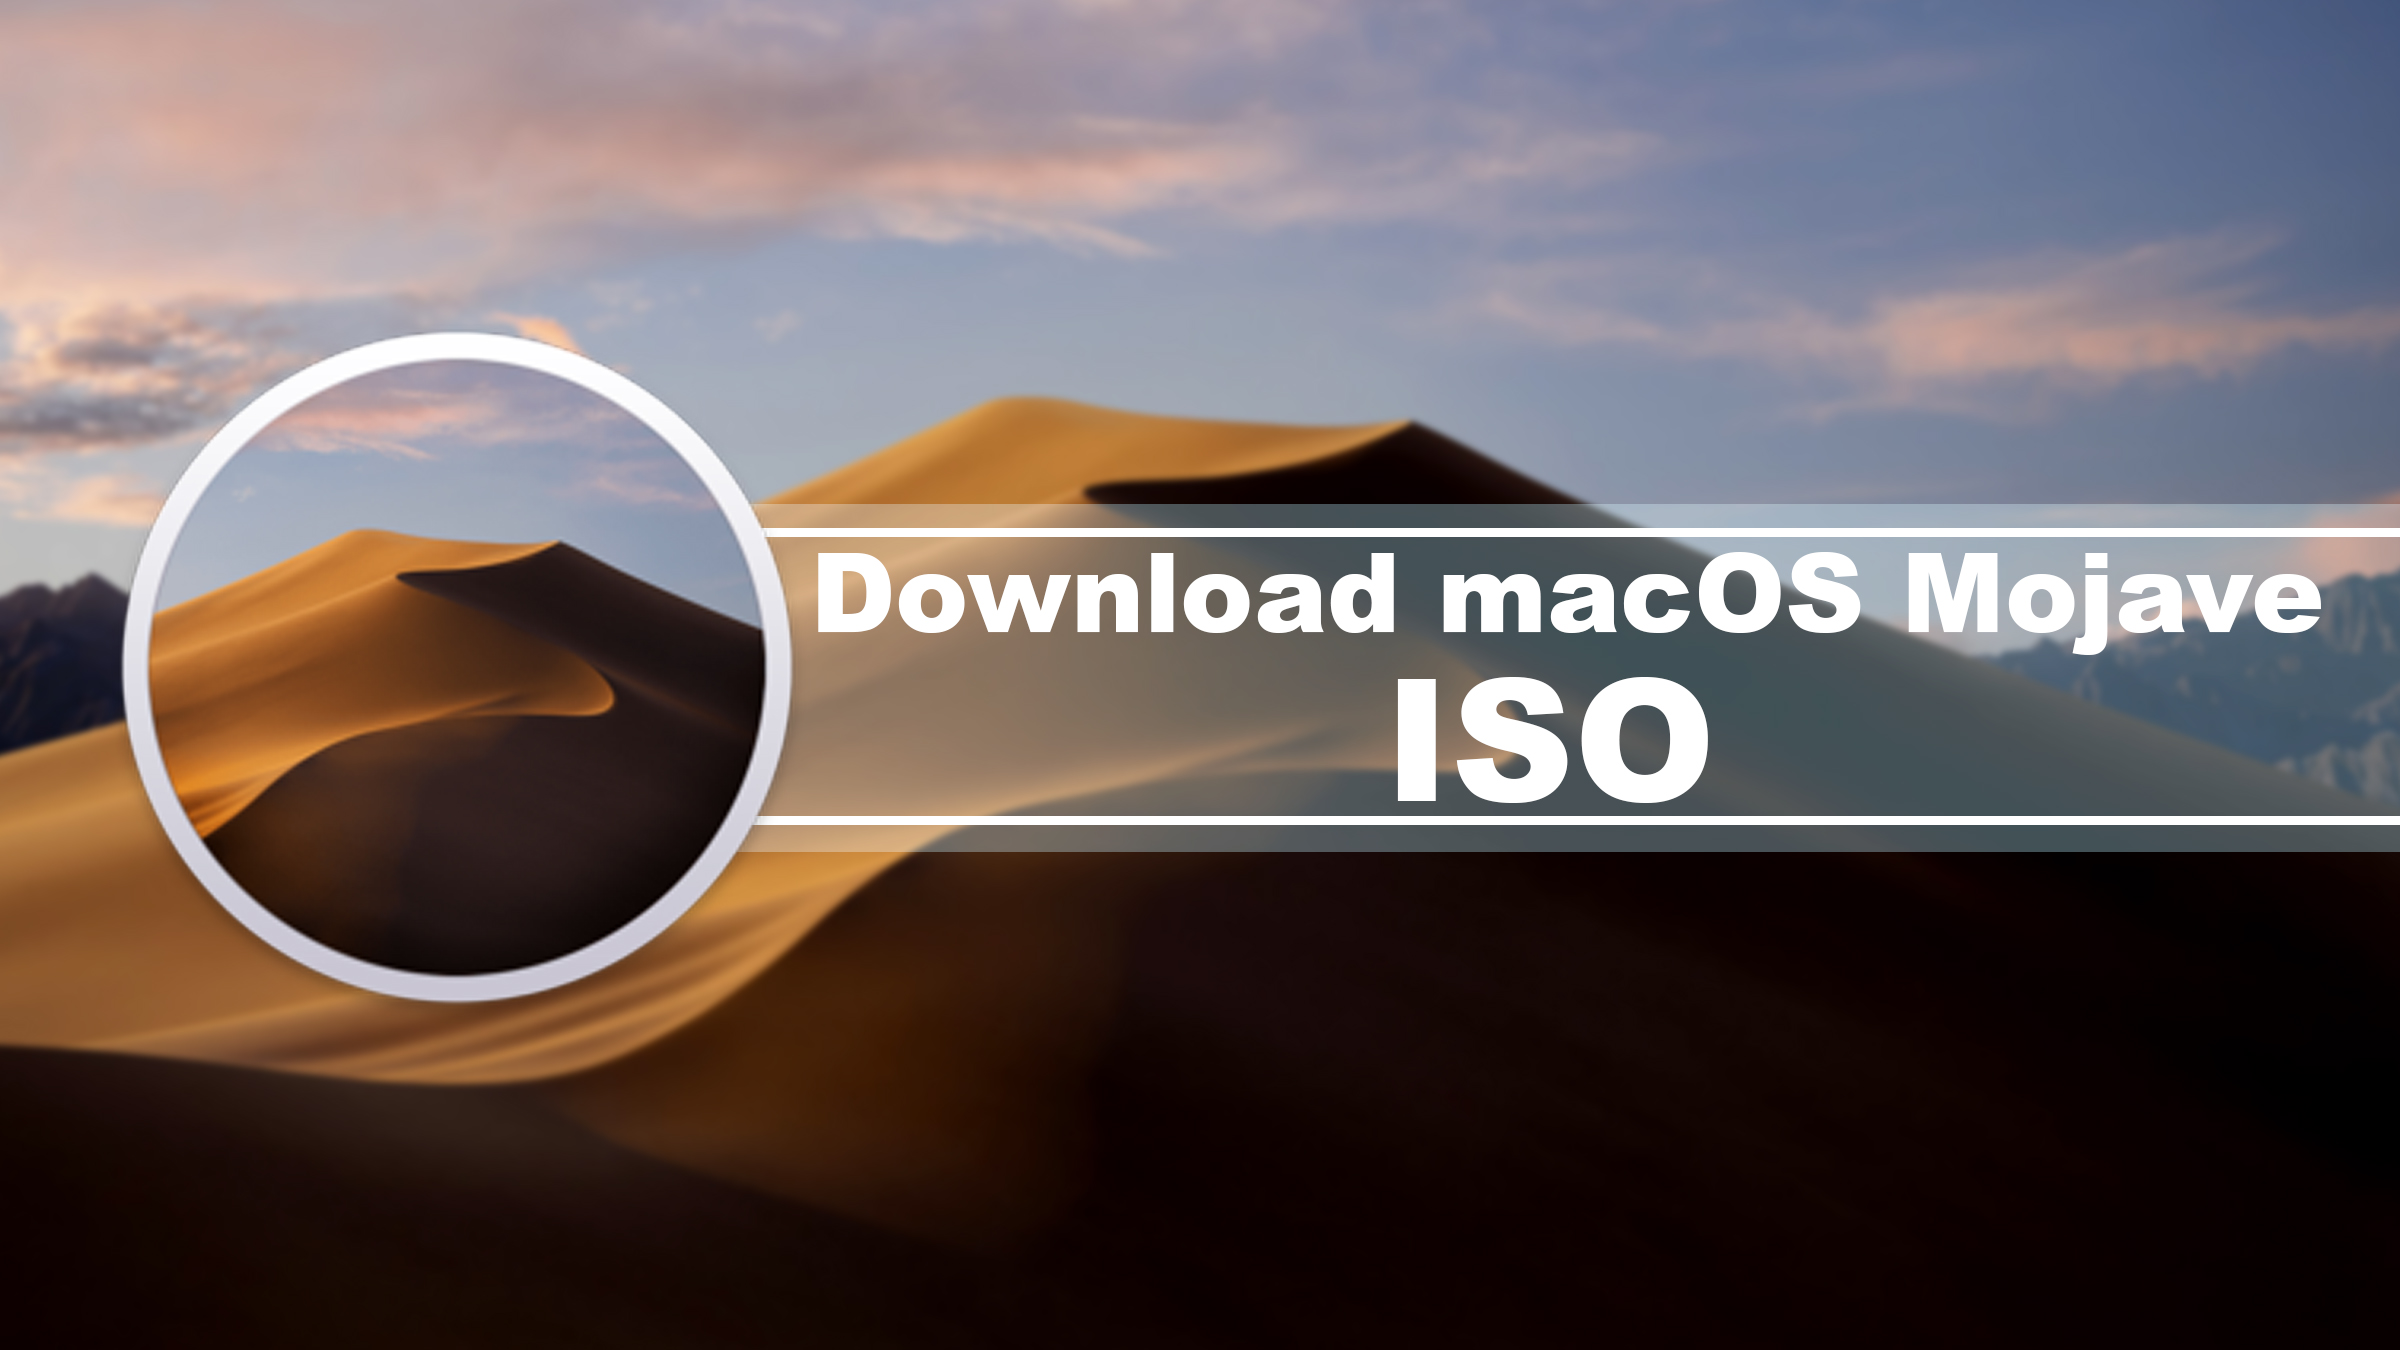 mac os download iso